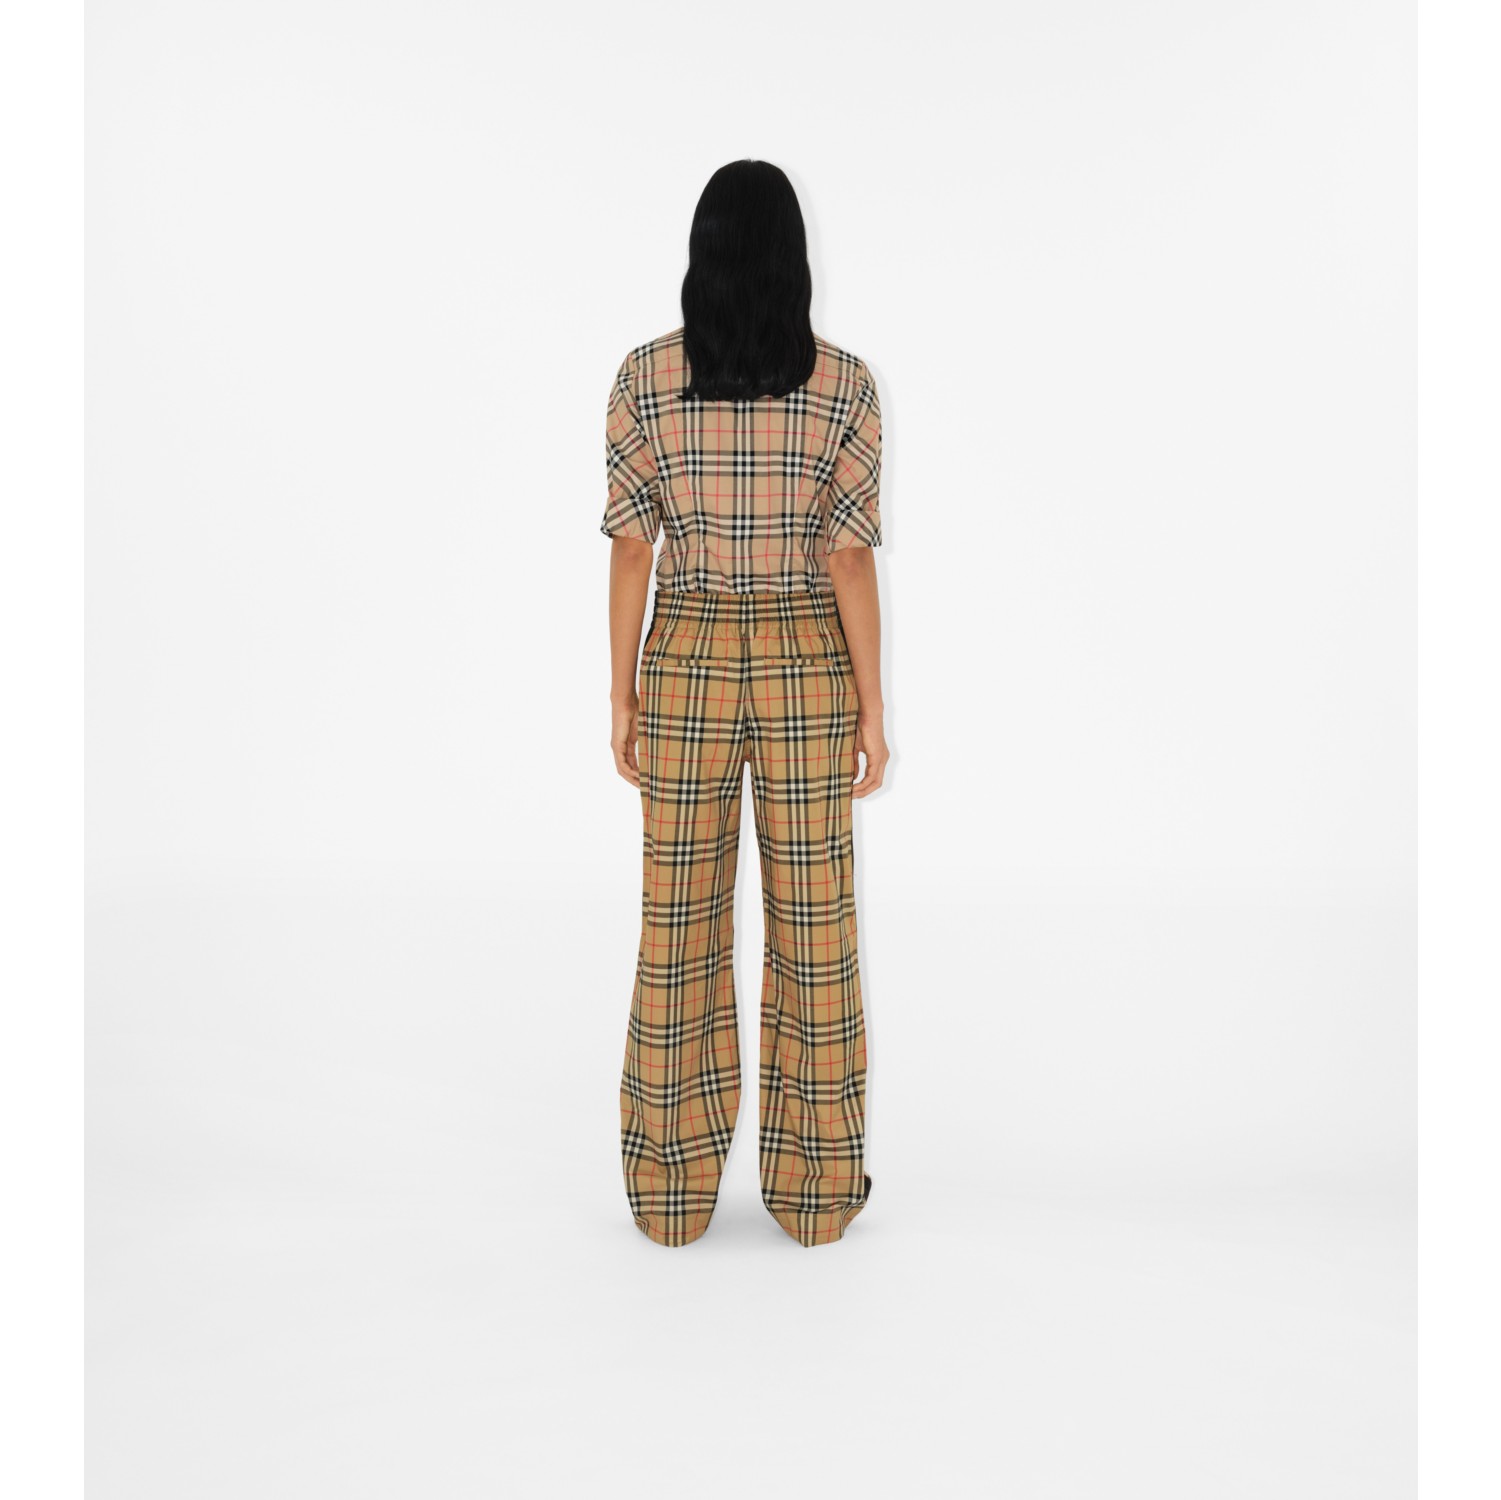 Burberry Womens Louane Trousers Vintage Check